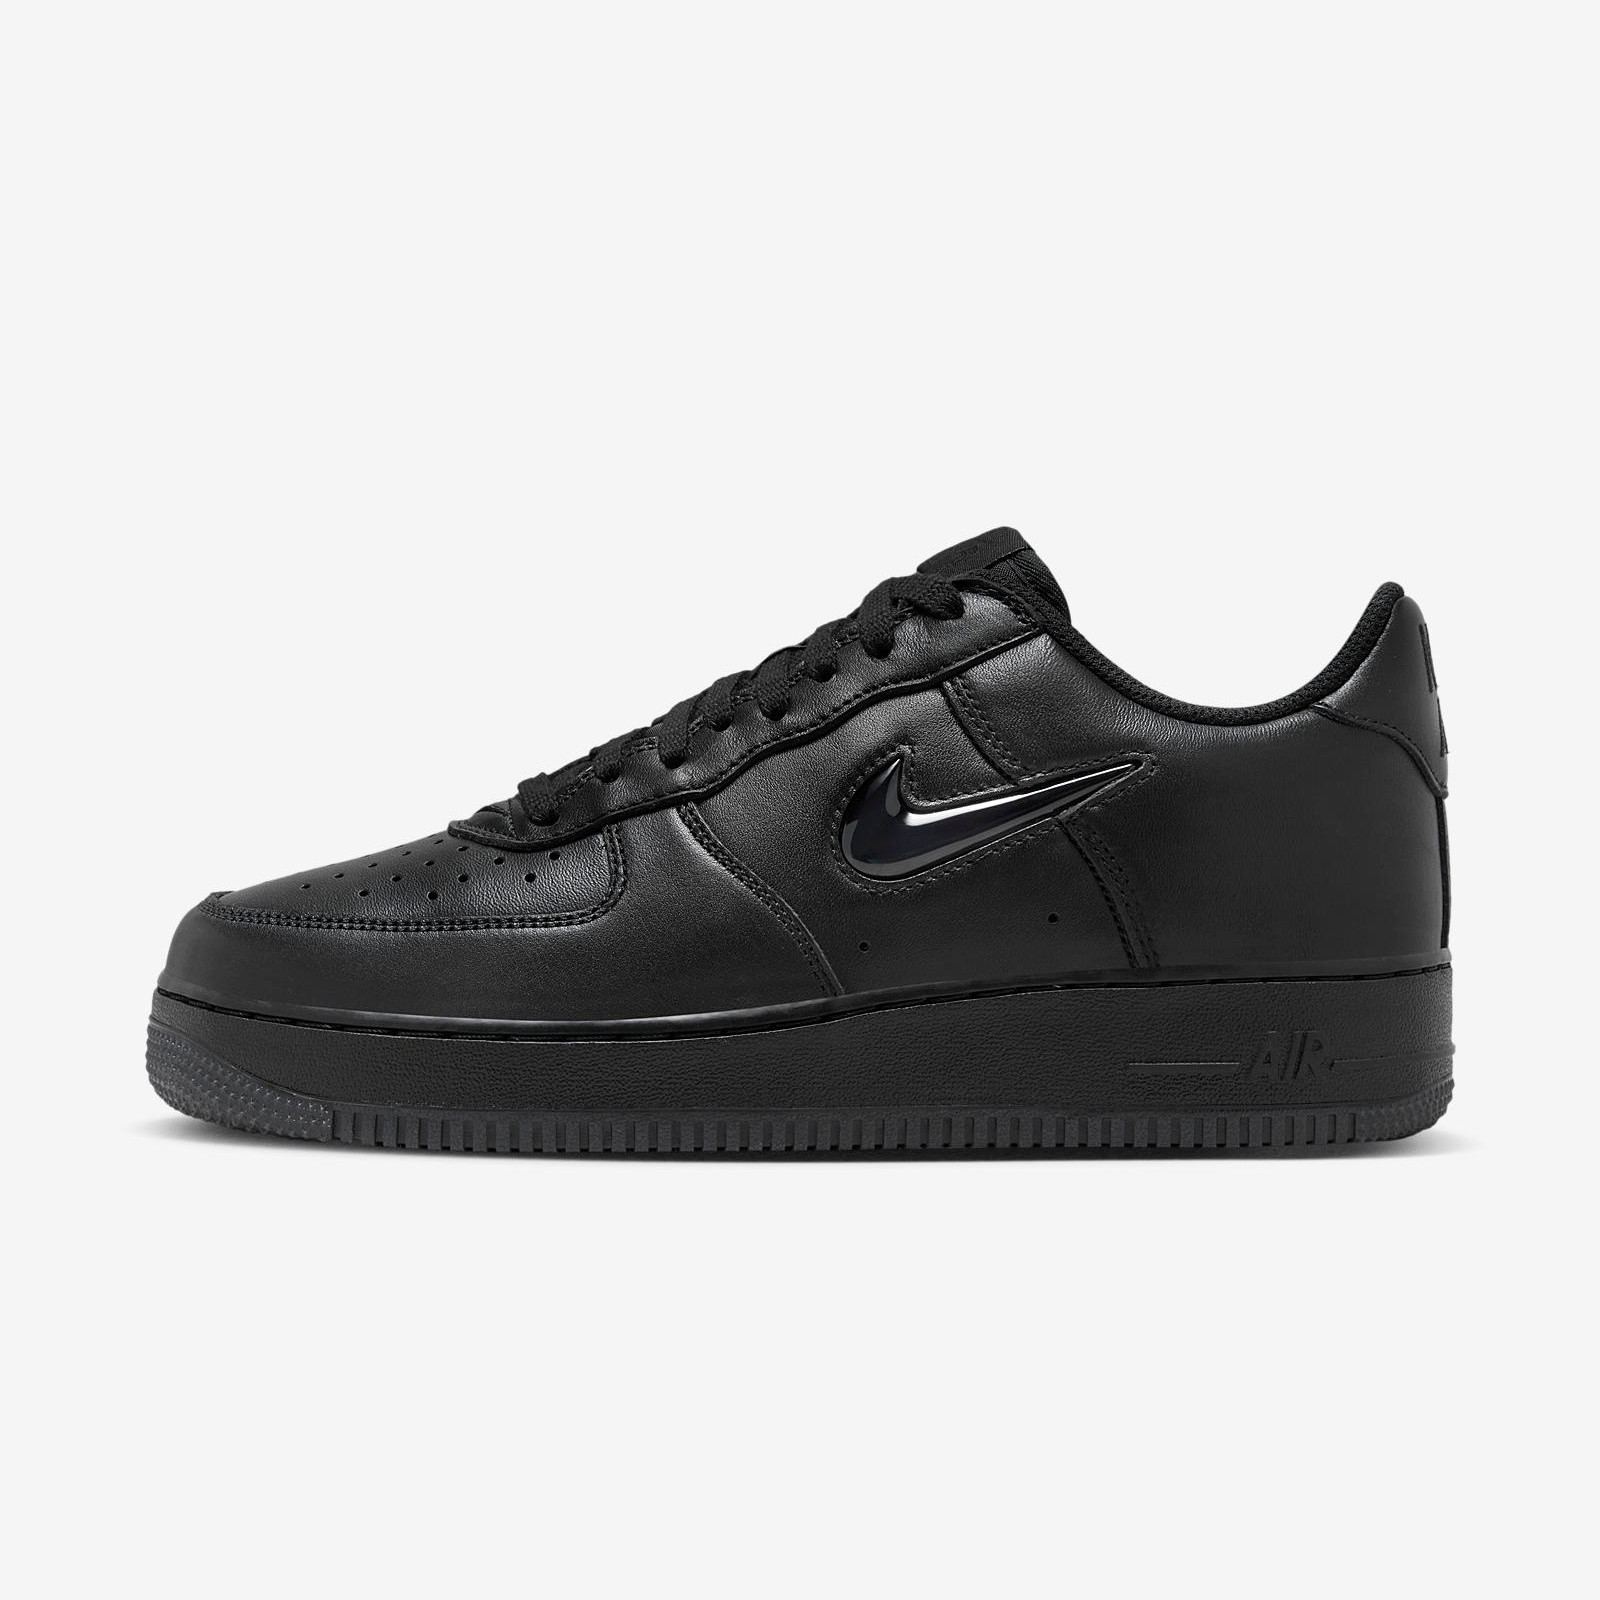 Nike Air Force 1 Low
Color of the Month